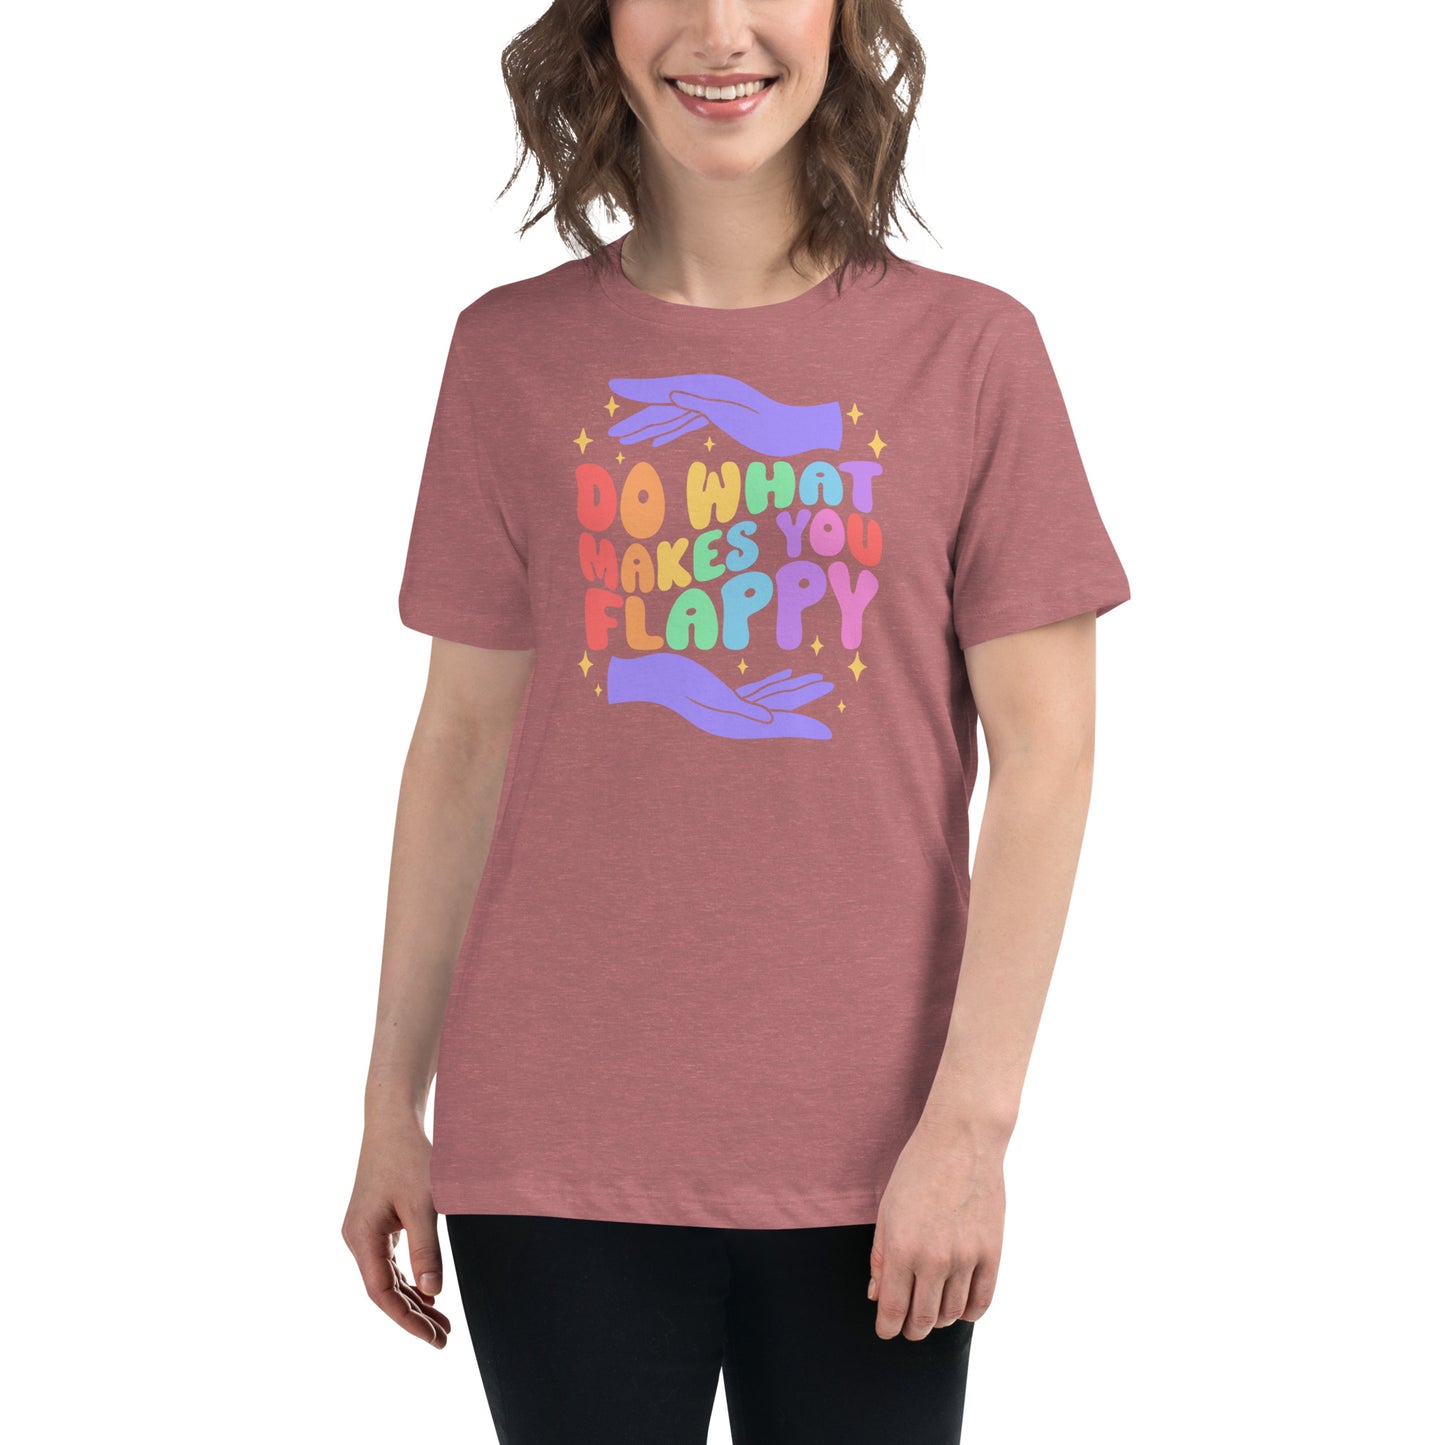 Do What Makes You Flappy - Women’s T-shirt